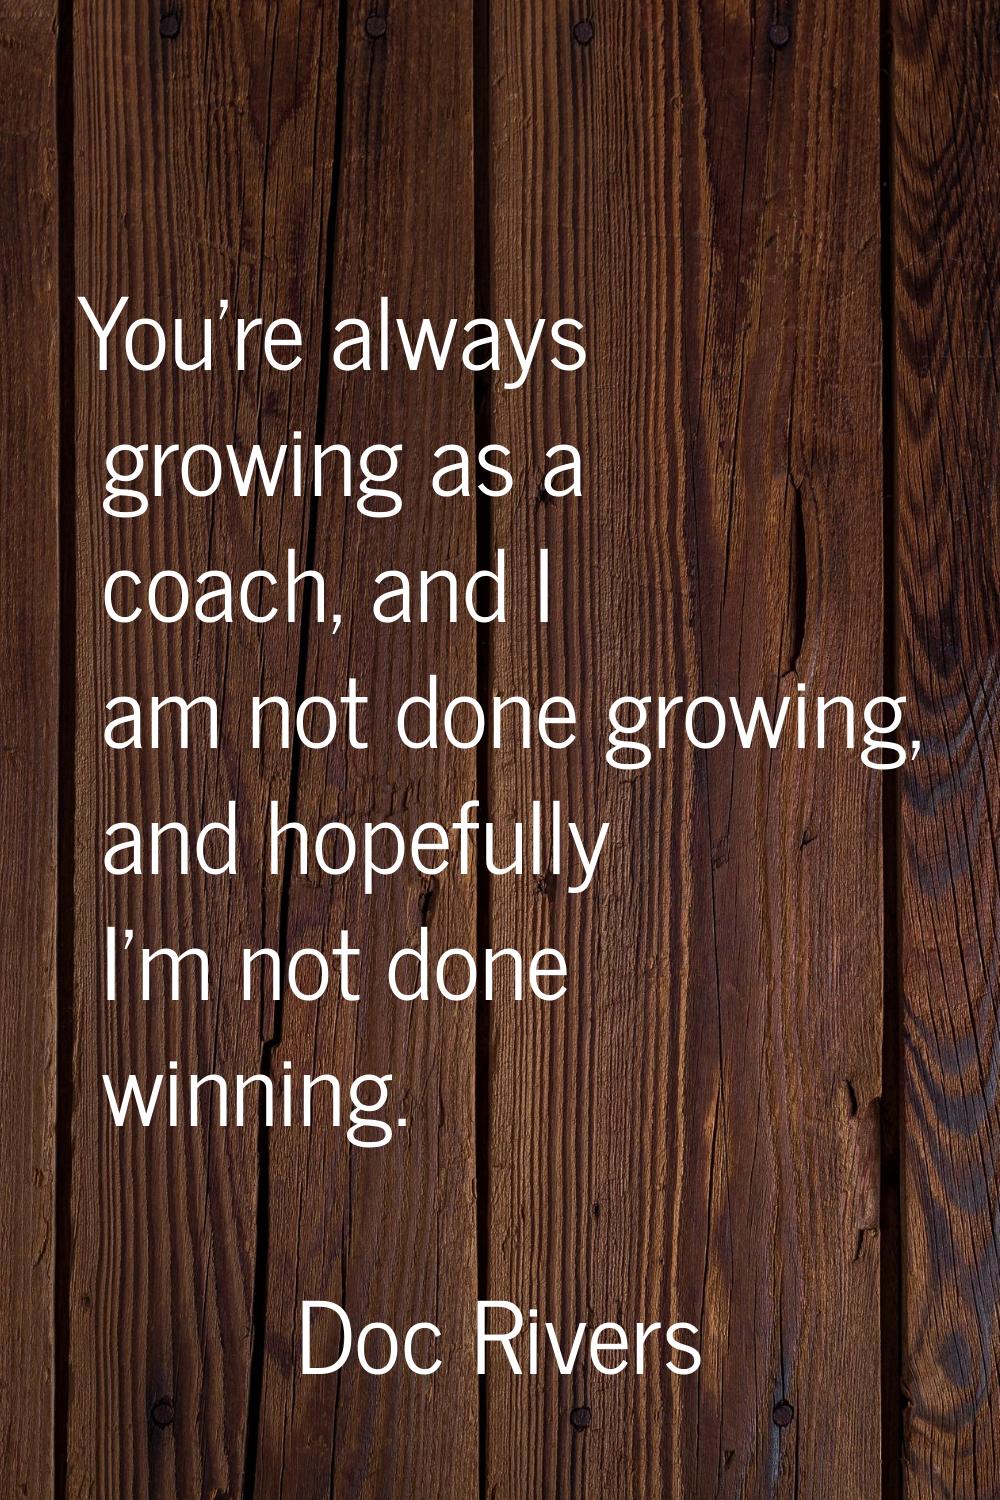 You're always growing as a coach, and I am not done growing, and hopefully I'm not done winning.